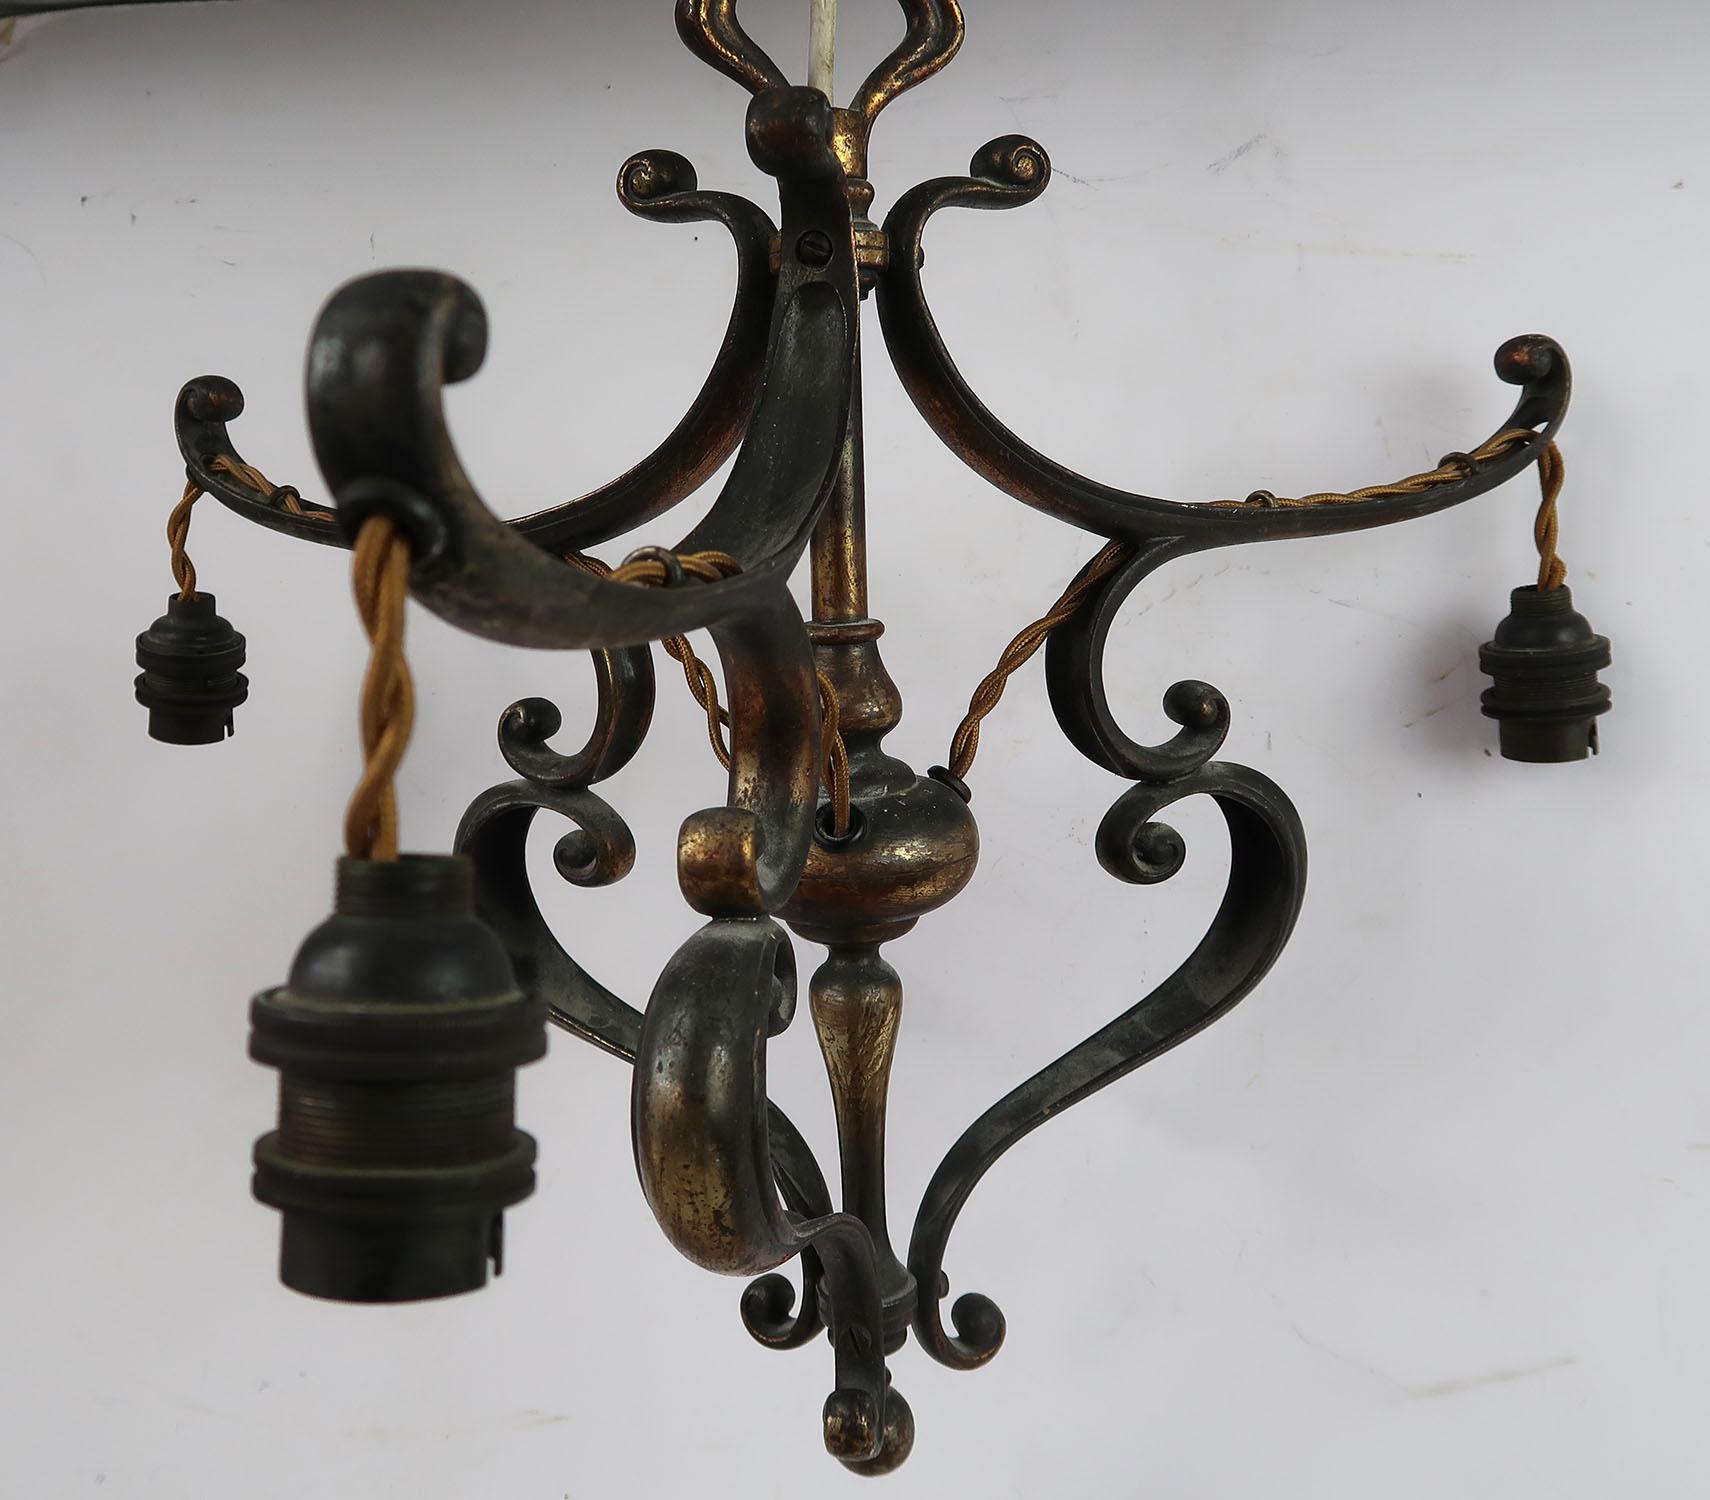 Early 20th Century Arts and Crafts Pendant Light Fitting, English, C.1900